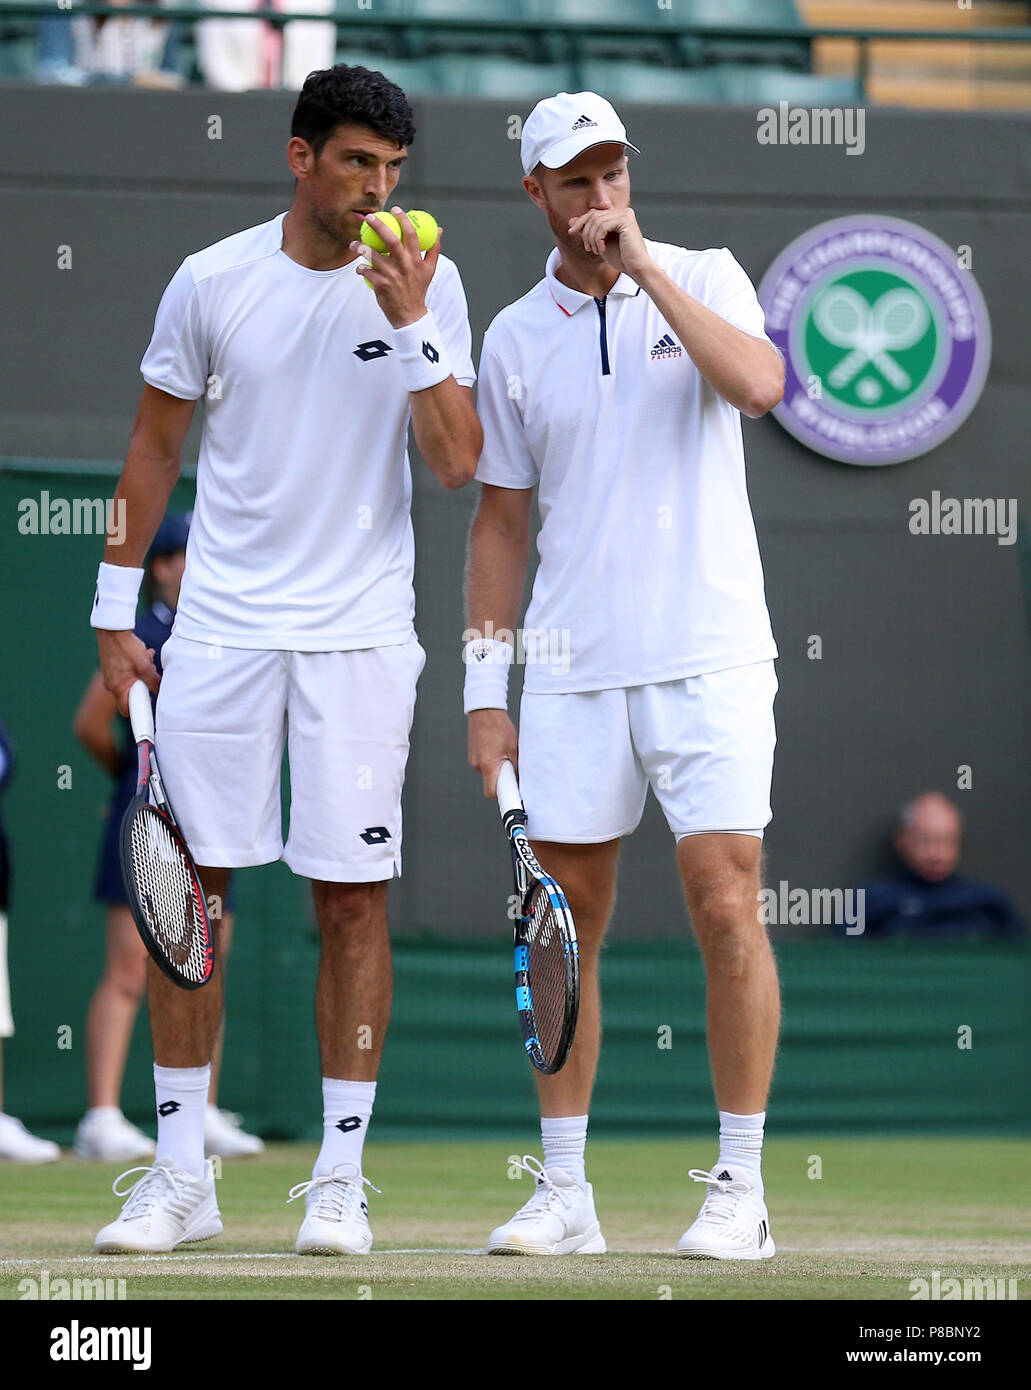 Dominic Inglot and Franko Skugor during their doubles match on day eight of  the Wimbledon Championships at the All England Lawn Tennis and Croquet  Club, Wimbledon. PRESS ASSOCIATION Photo. Picture date: Tuesday